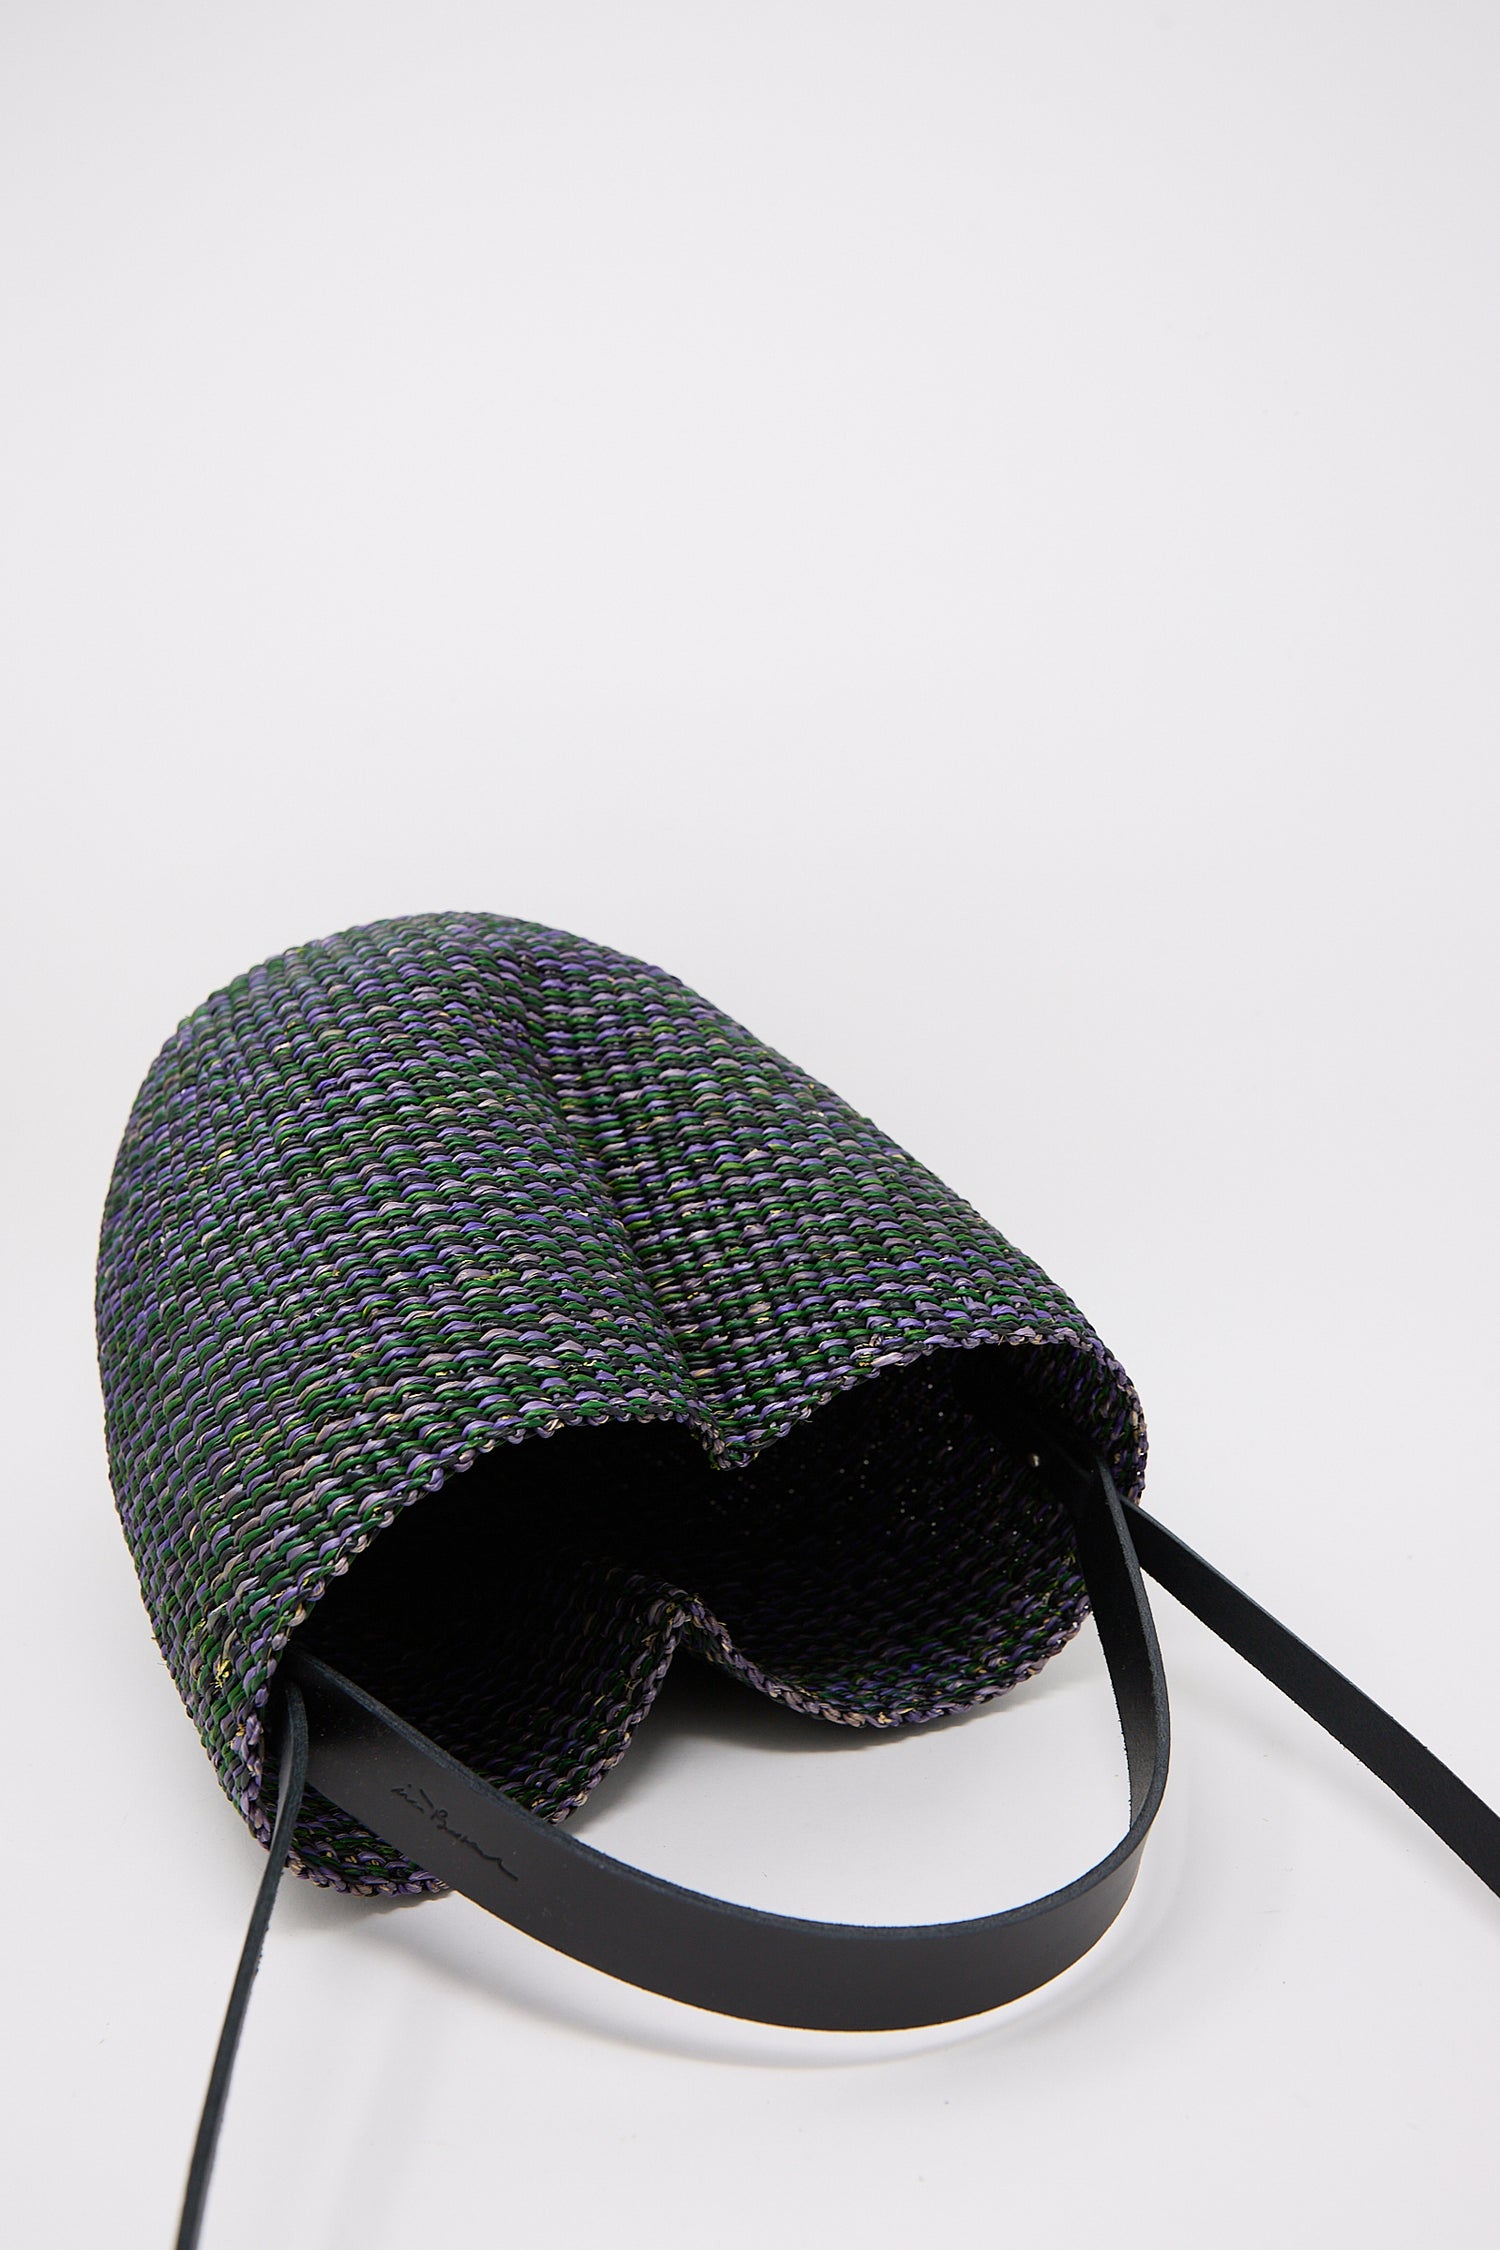 A N. 36 Haricot Bag in Green by Inès Bressand with a black strap on a white background.